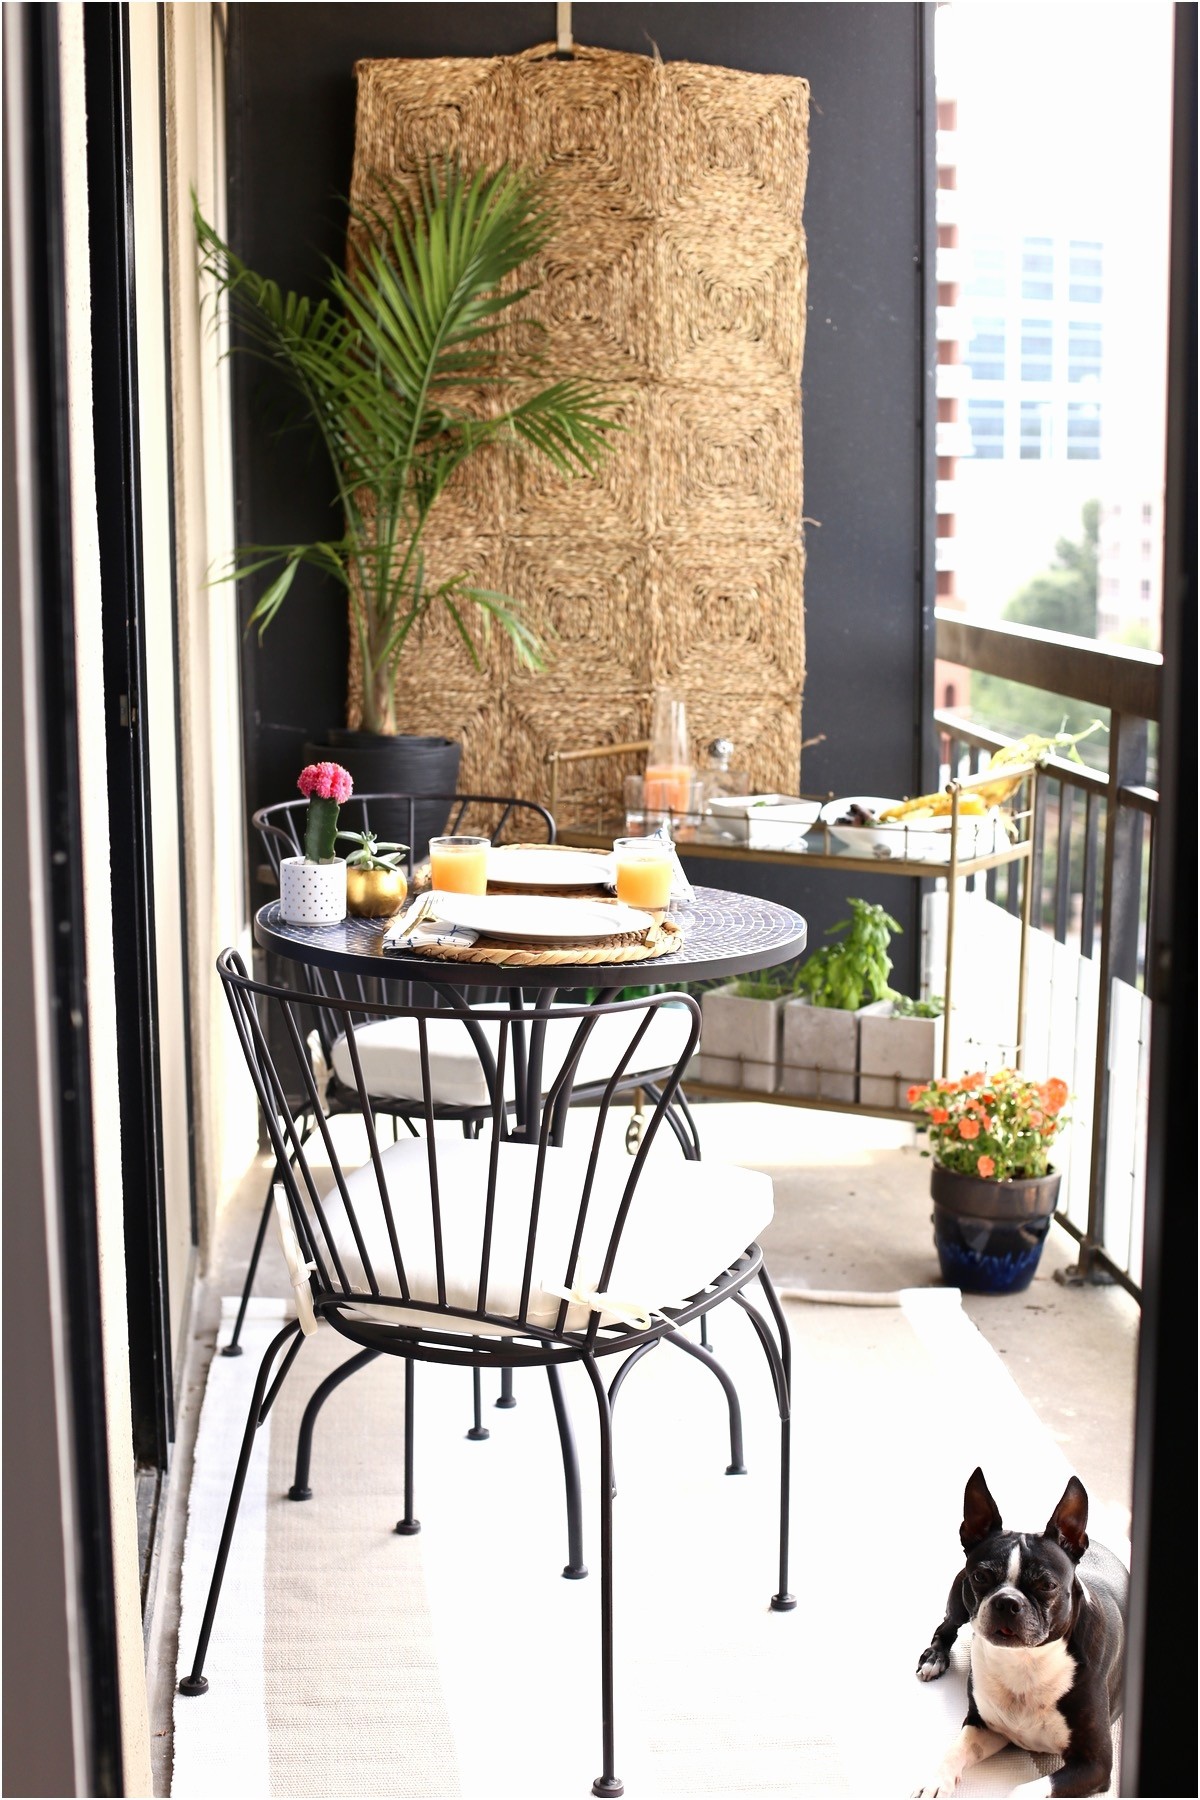 small-space-patio-furniture-inspirational-small-space-patio-furniture-lovely-high-rise-patio-ideas-best-of-small-space-patio-furniture-1532312335856177327640.jpg